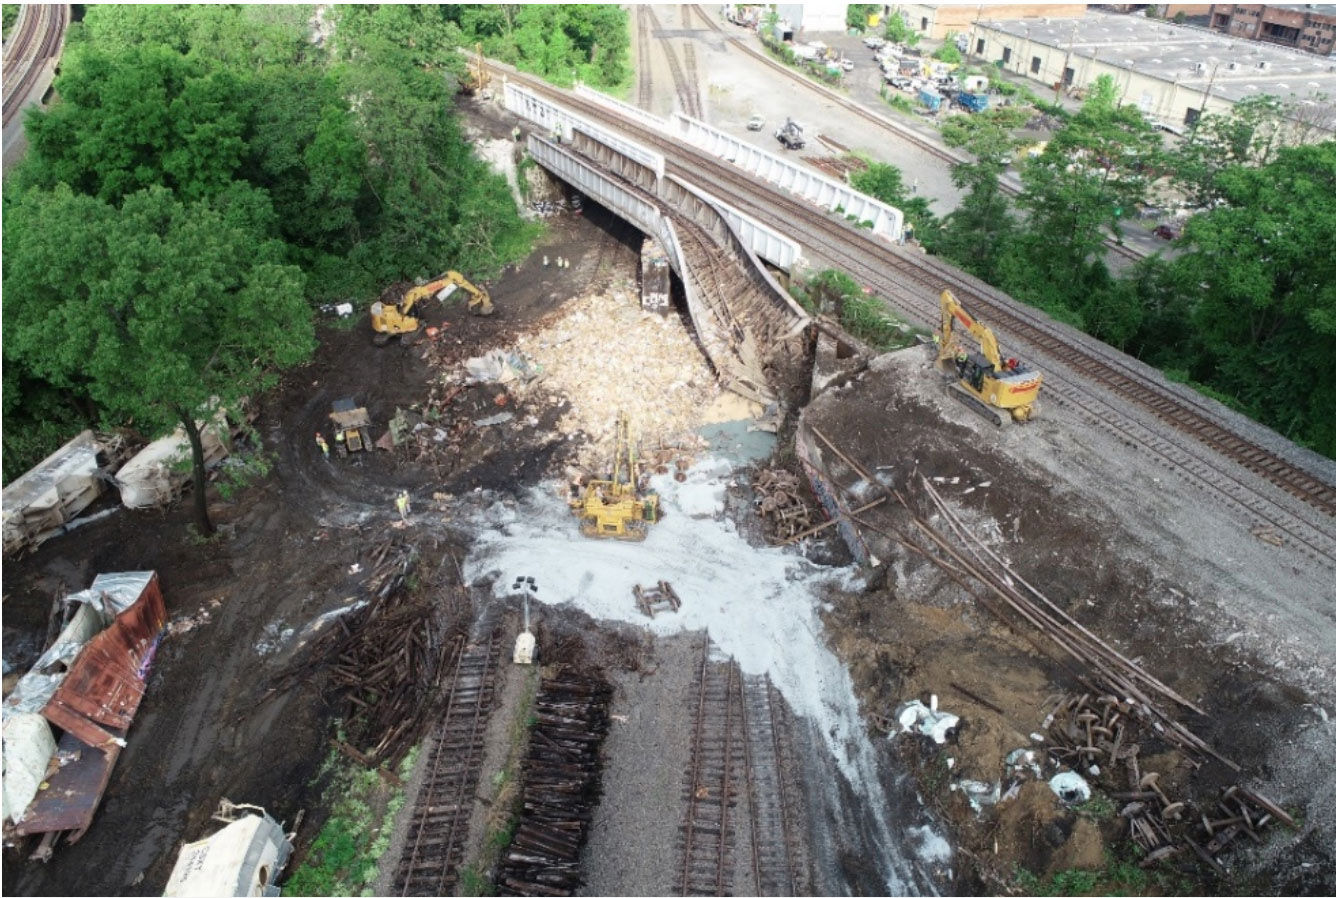 The bridge from which freight cars fell in Alexandria, Virginia, May 19. (Courtesy NTSB)